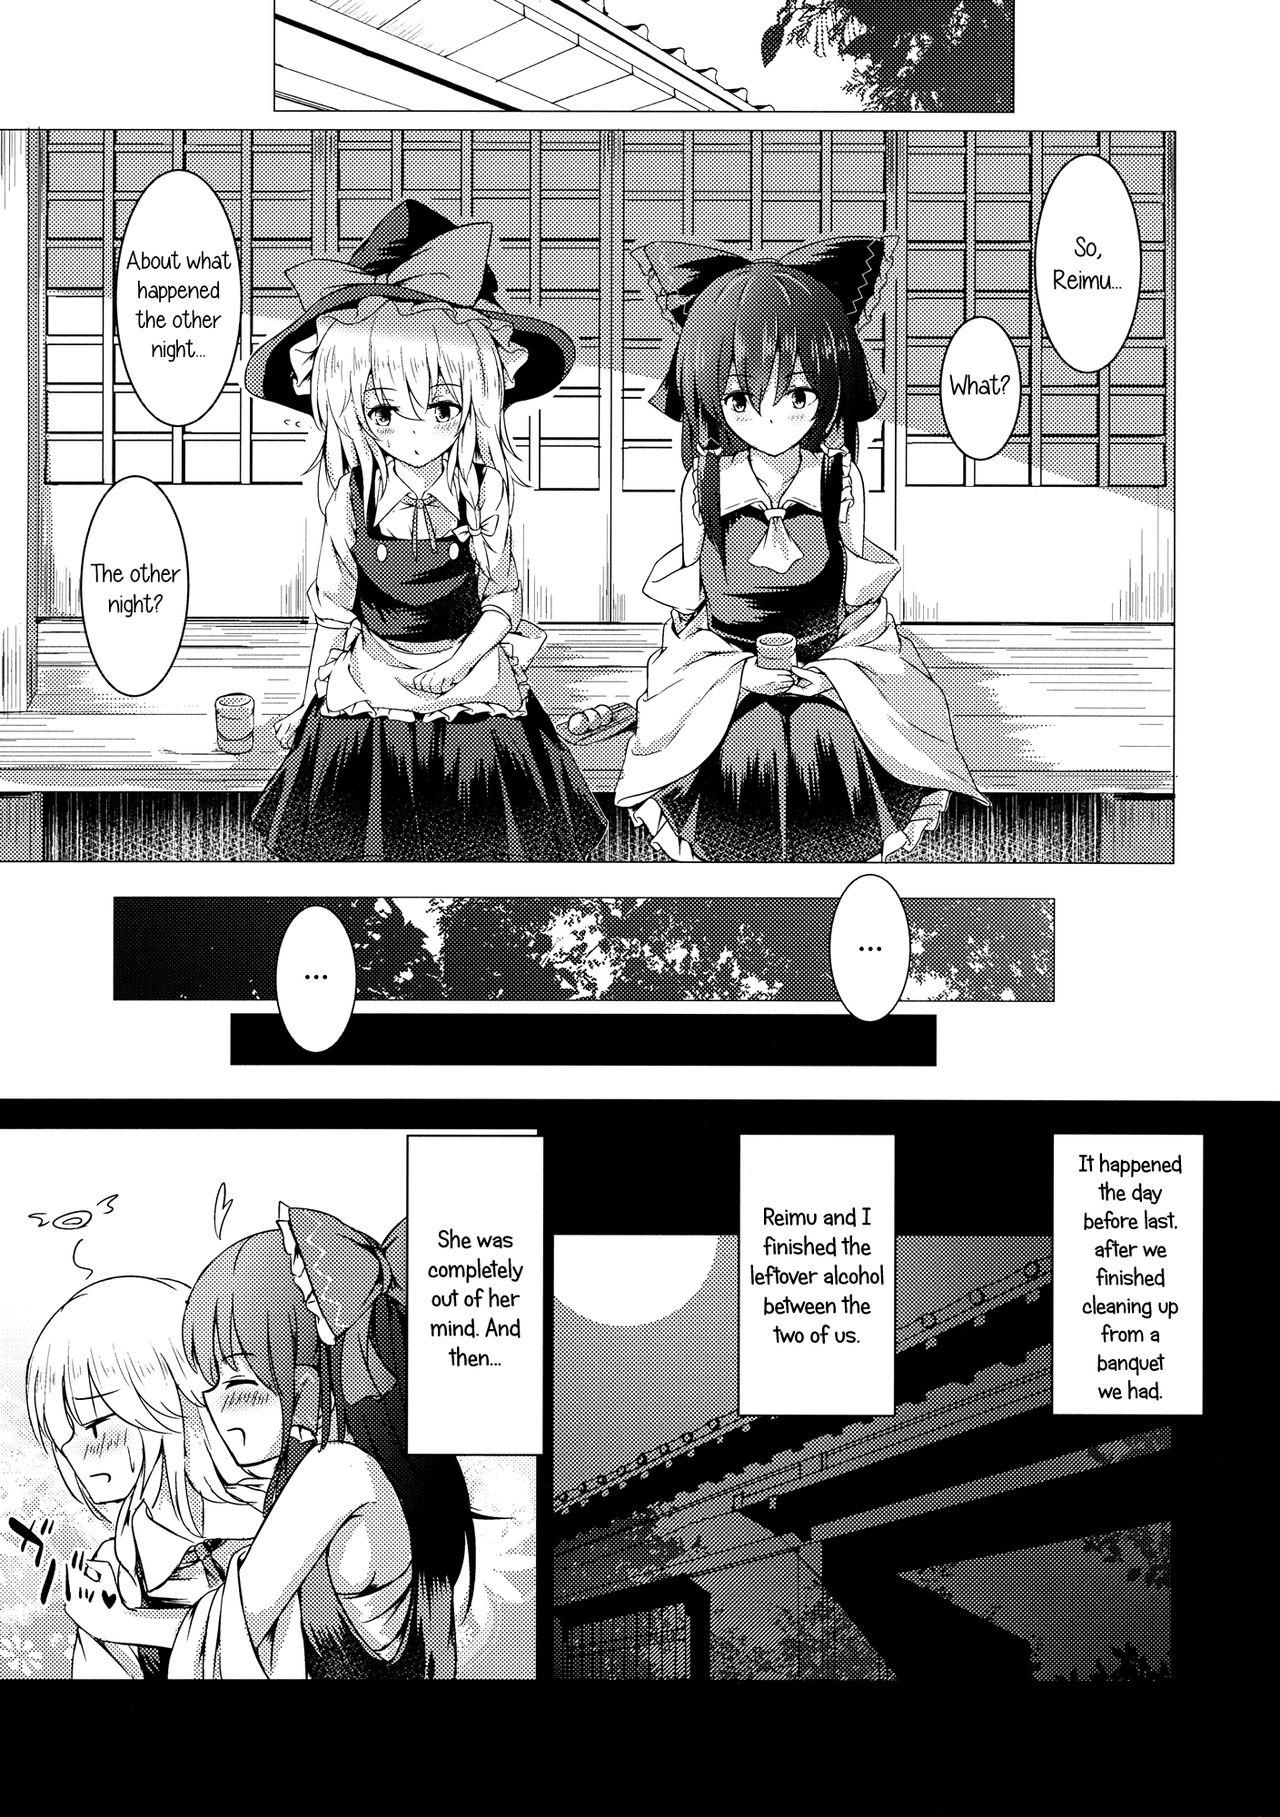 Hot Mom ever since - Touhou project Yanks Featured - Page 4